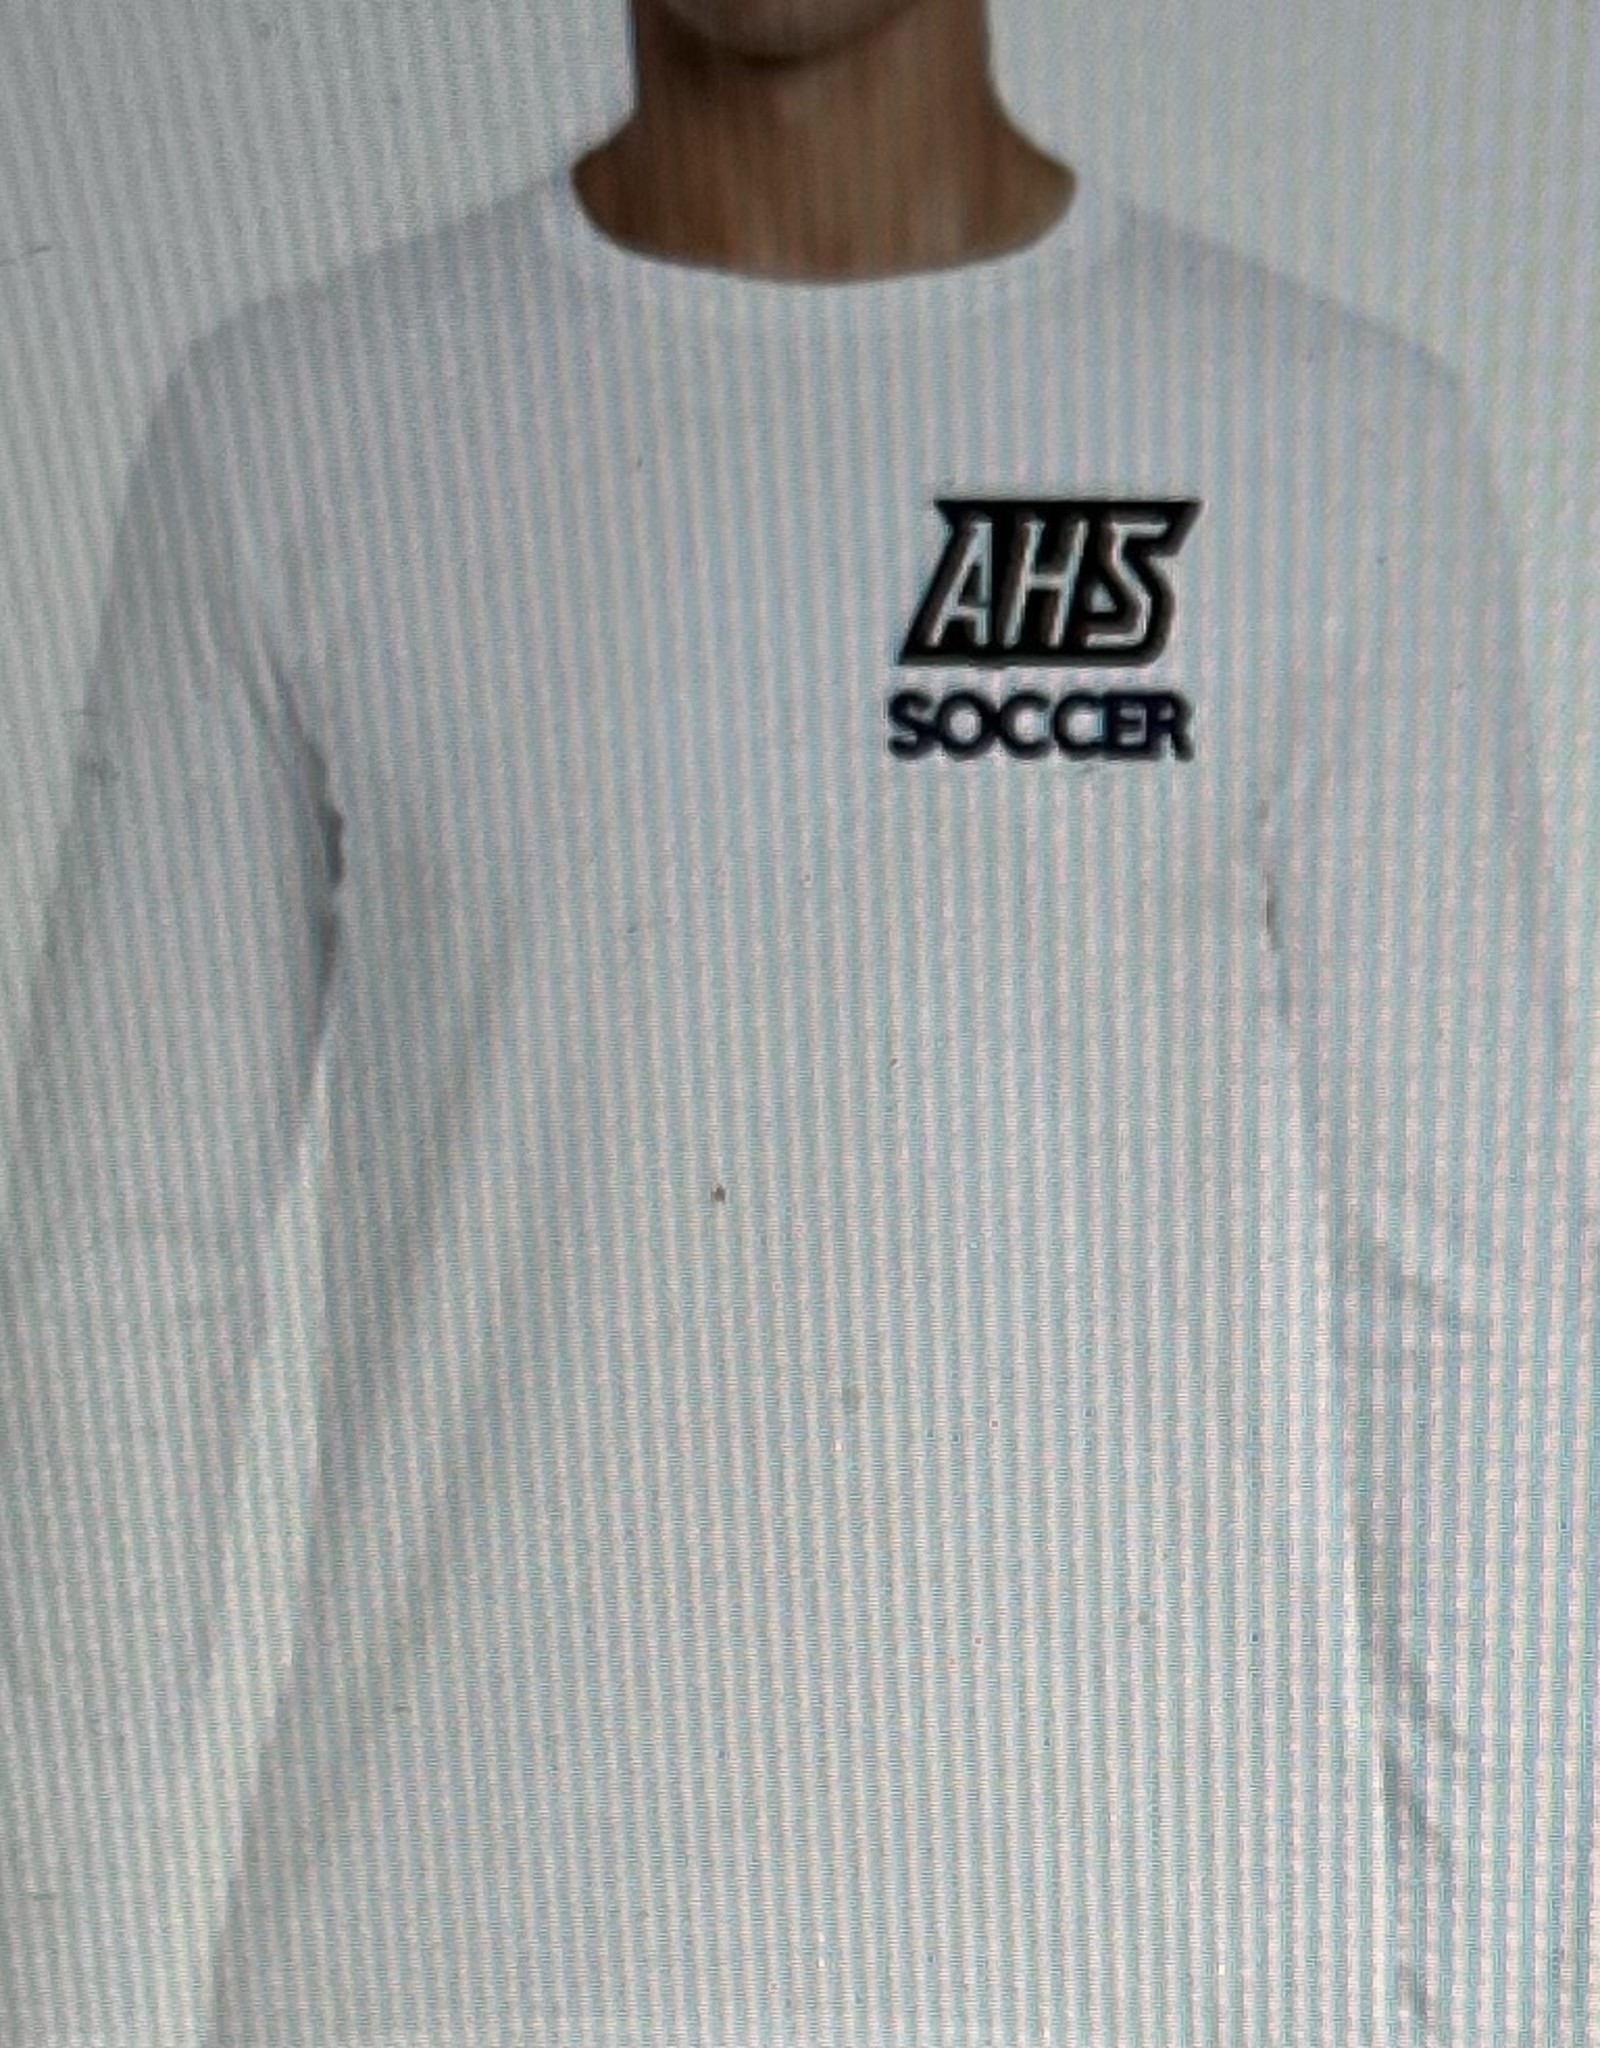 Arlington L/S with pocket logo and all players names on back